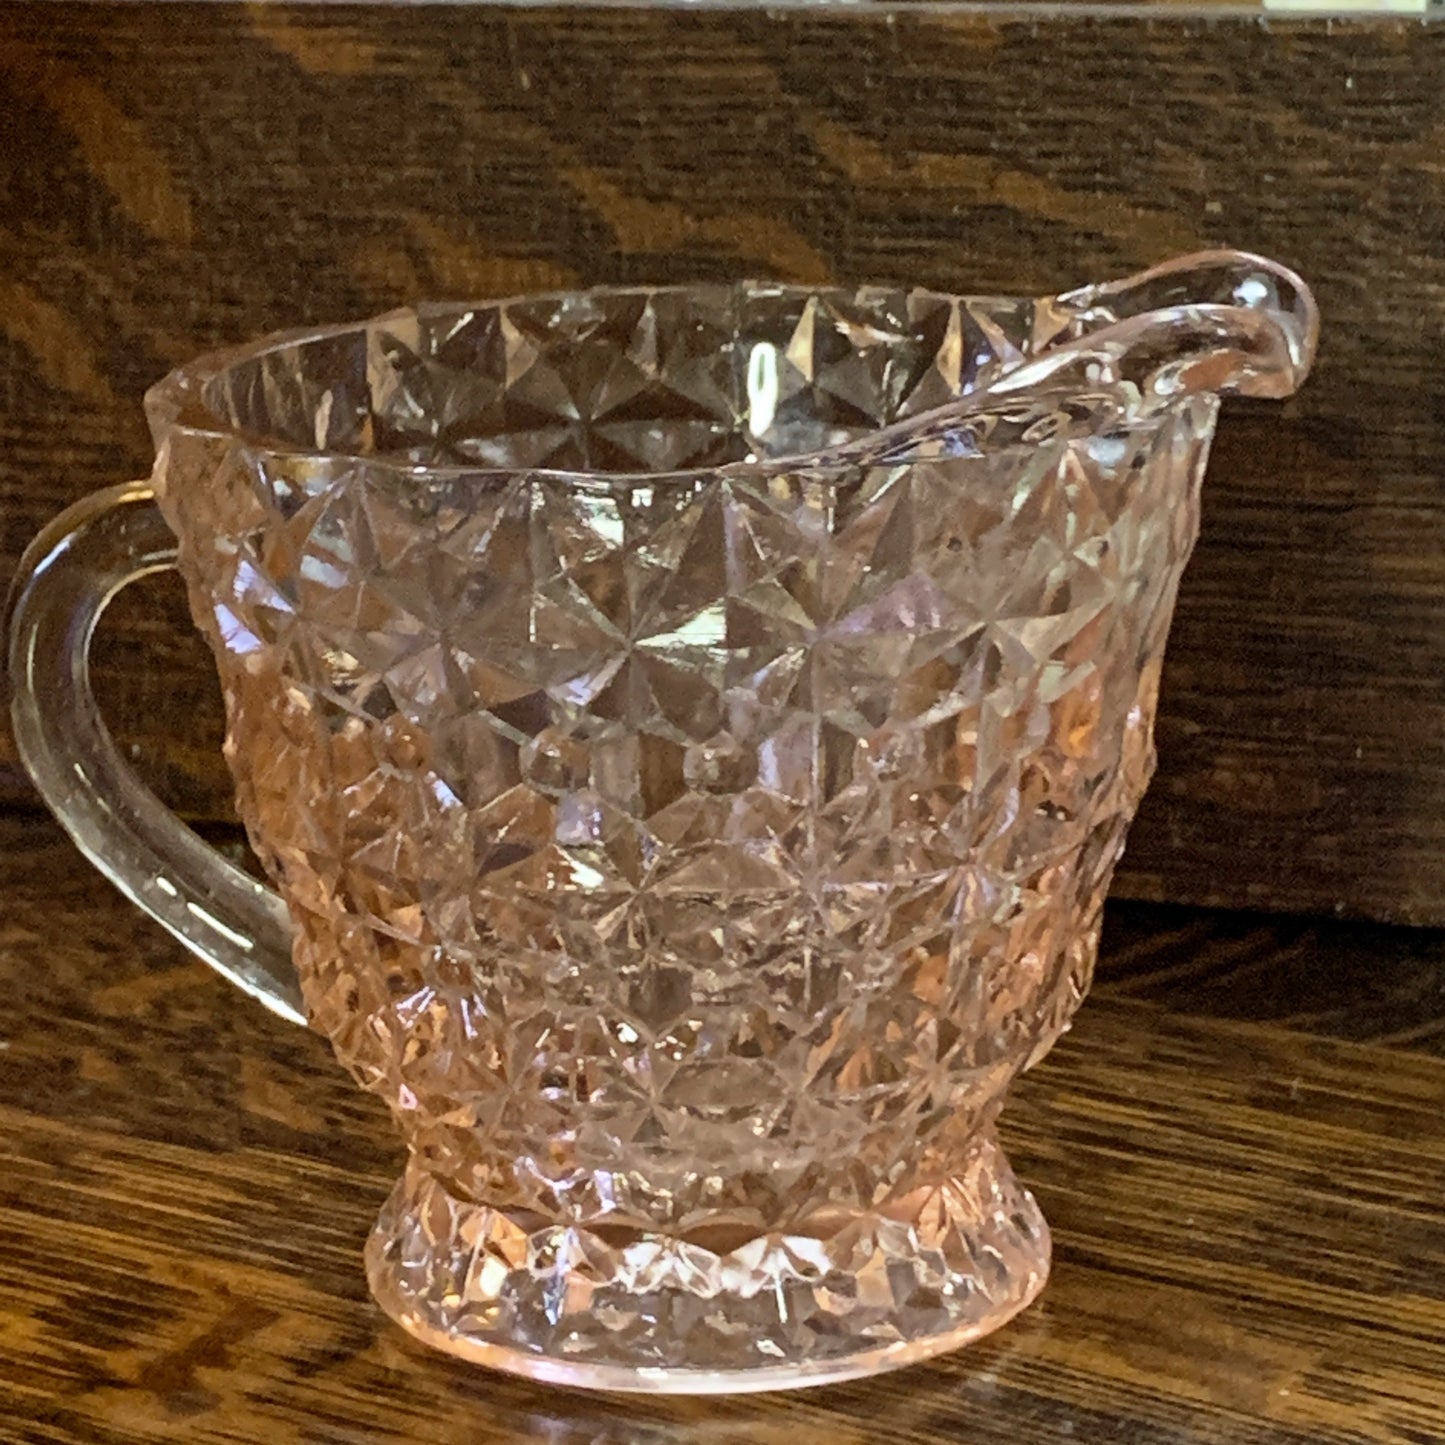 Pink Depression Glass Cream Pitcher, Jeanette Glass Buttons and Bows, Jeanette Glass Holiday Pattern